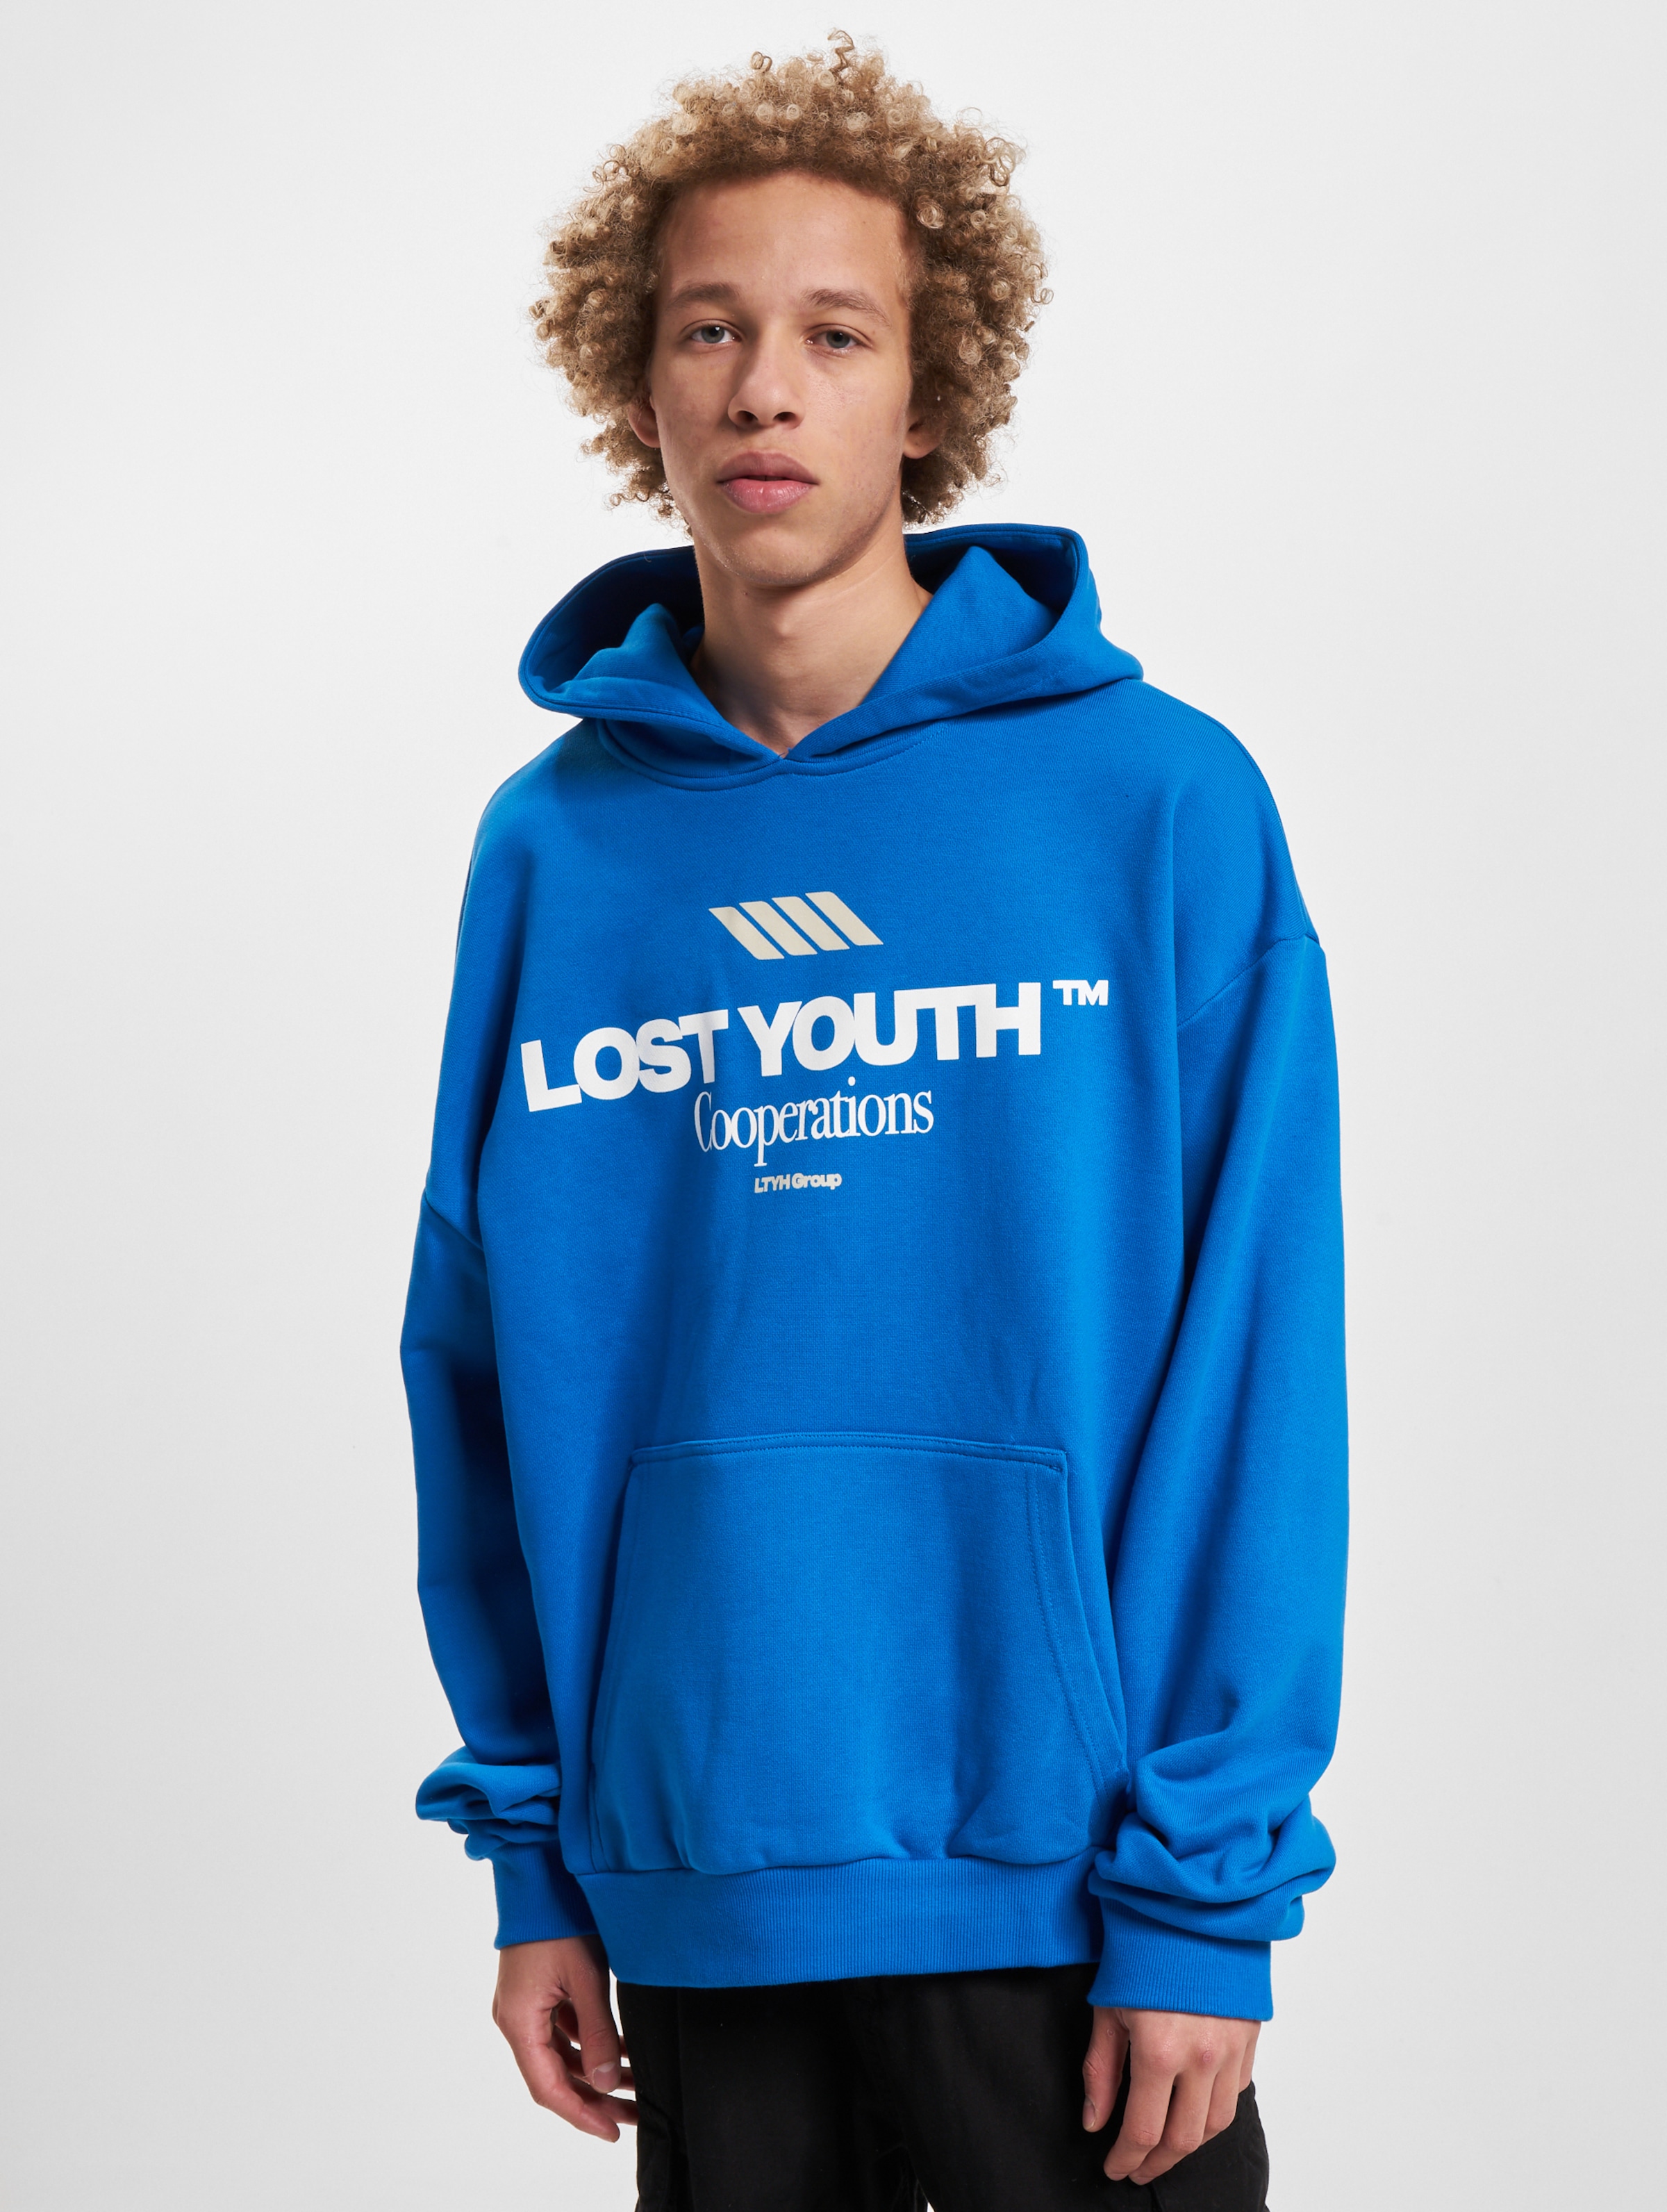 Lost Youth LY HOODY - COOPERATIONS Mannen op kleur blauw, Maat 3XL